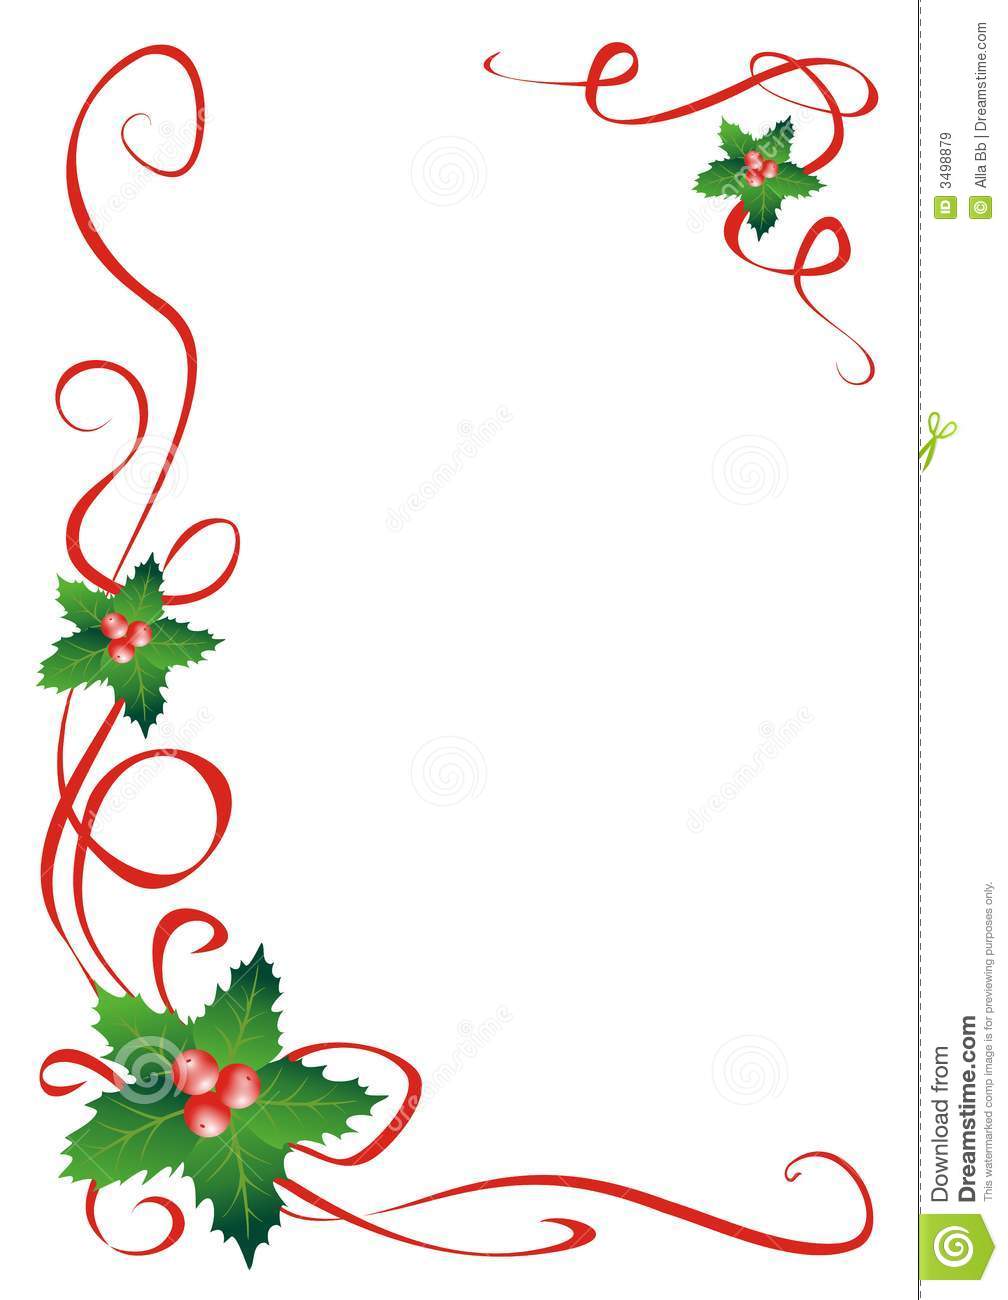 Christmas Holly Border Decoration Royalty Free Stock Images   Image